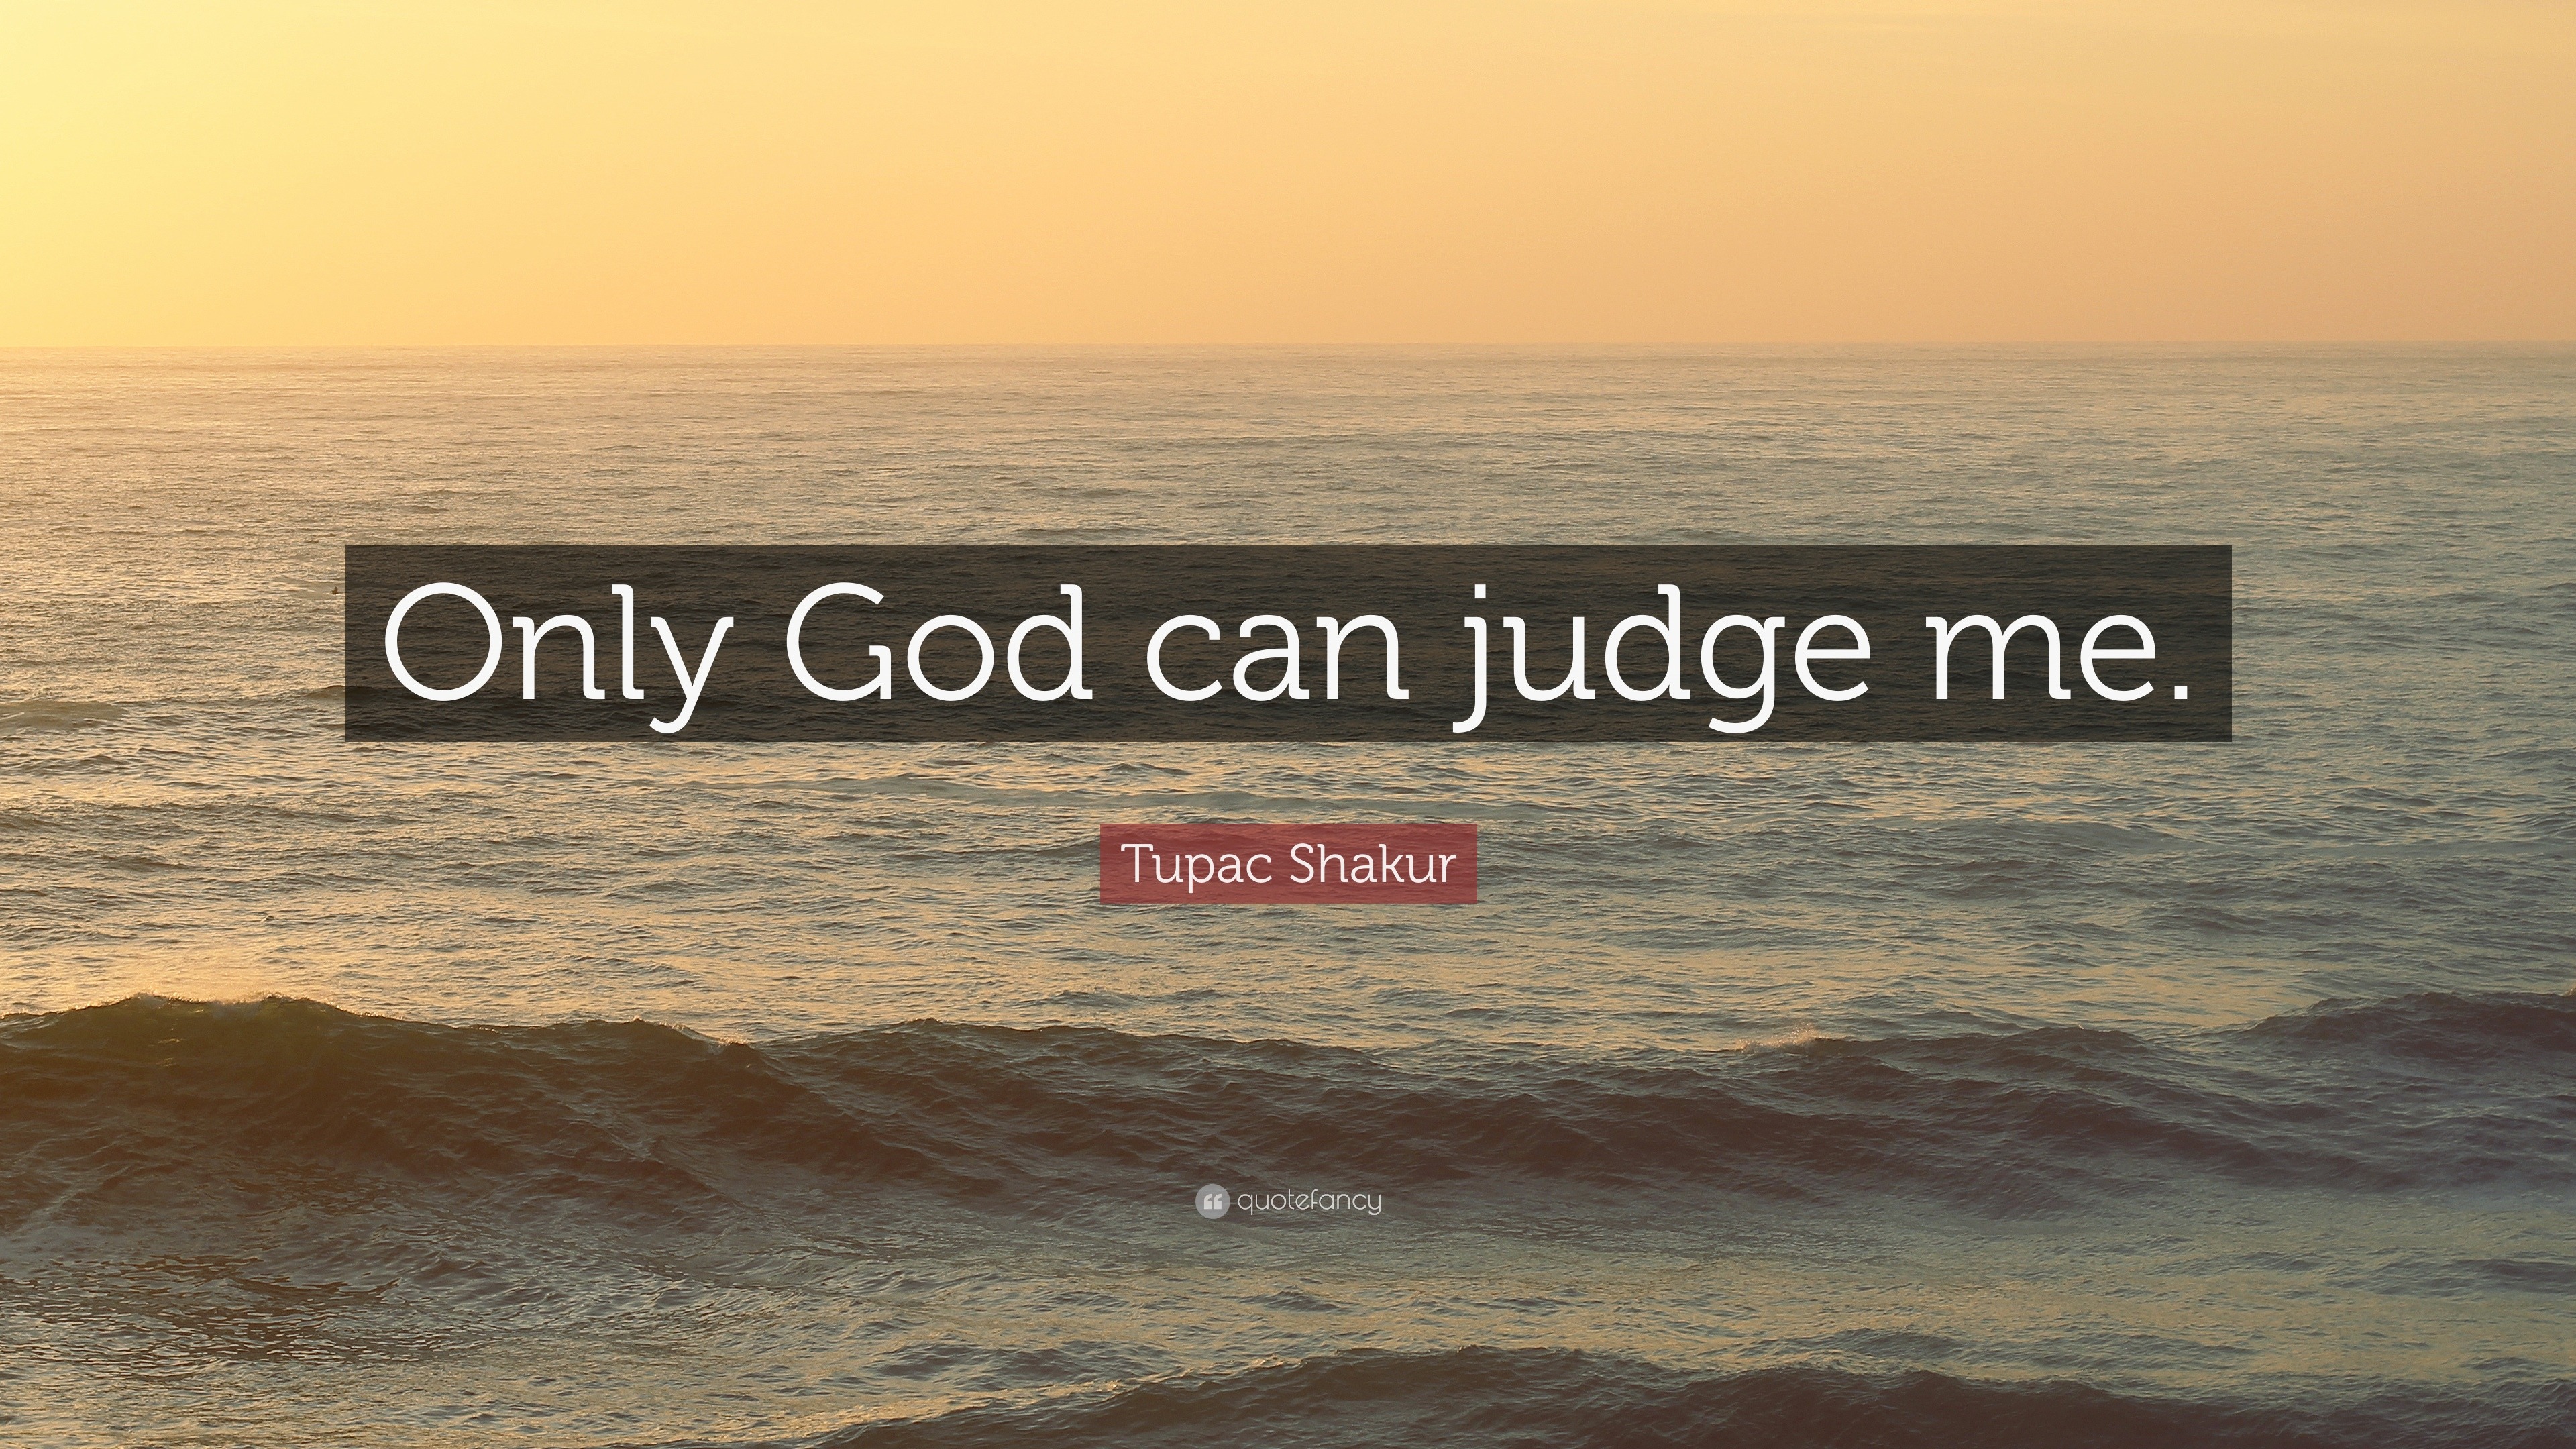 Tupac Shakur Quote   Only  God  can  judge me  